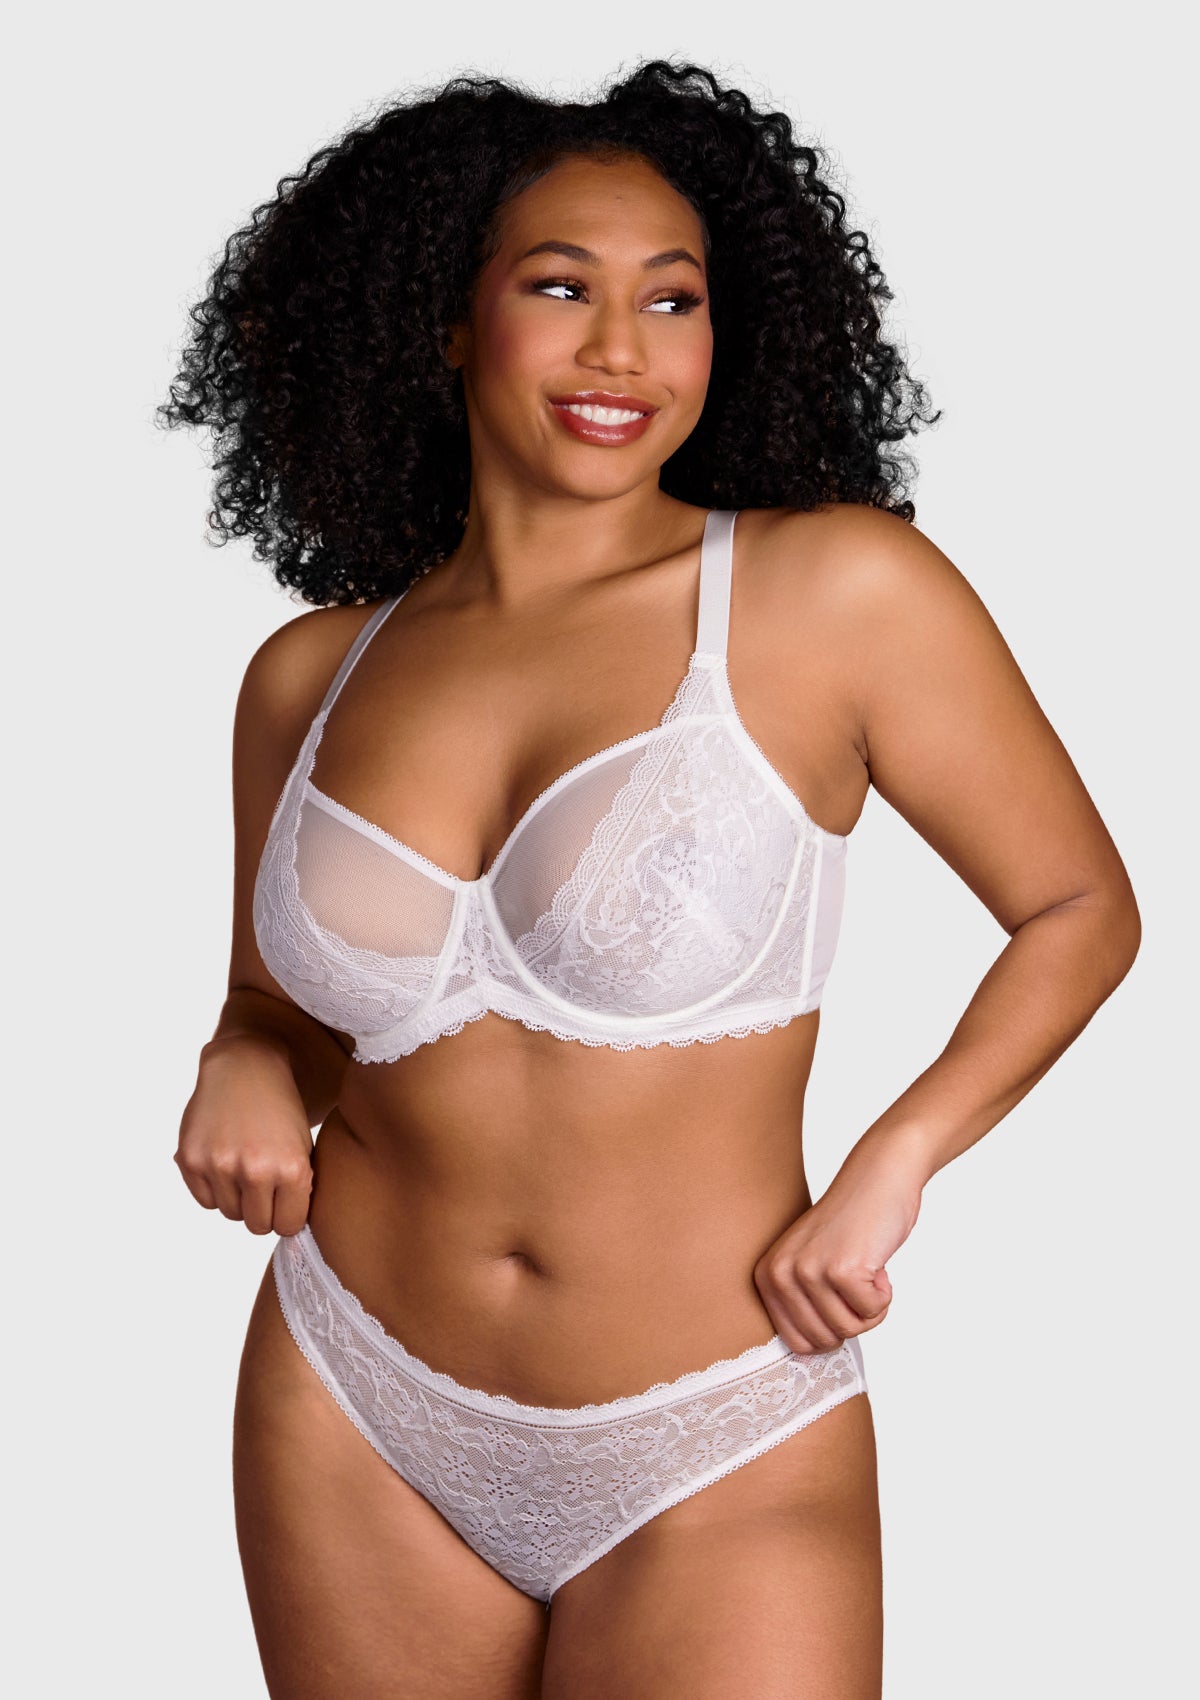 HSIA Anemone Big Bra: Best Bra For Lift And Support, Floral Bra - Black / 40 / DD/E